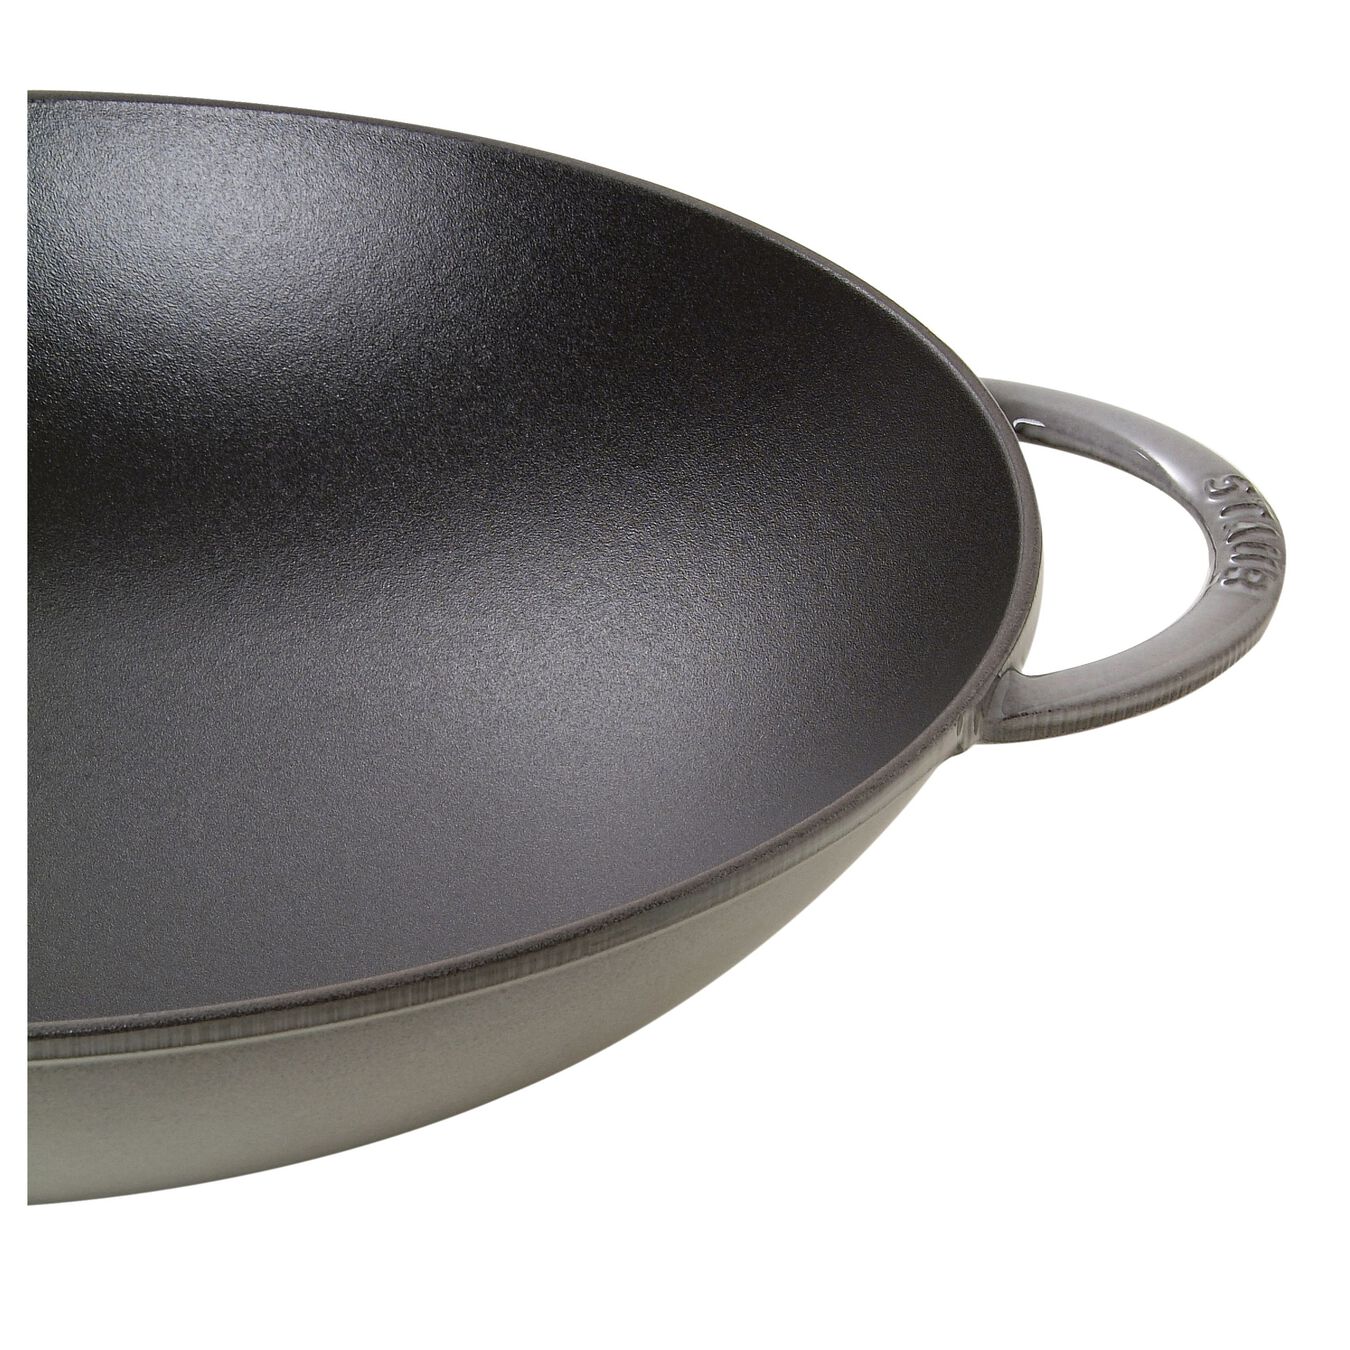 37 cm Cast iron Wok with glass lid graphite-grey,,large 2